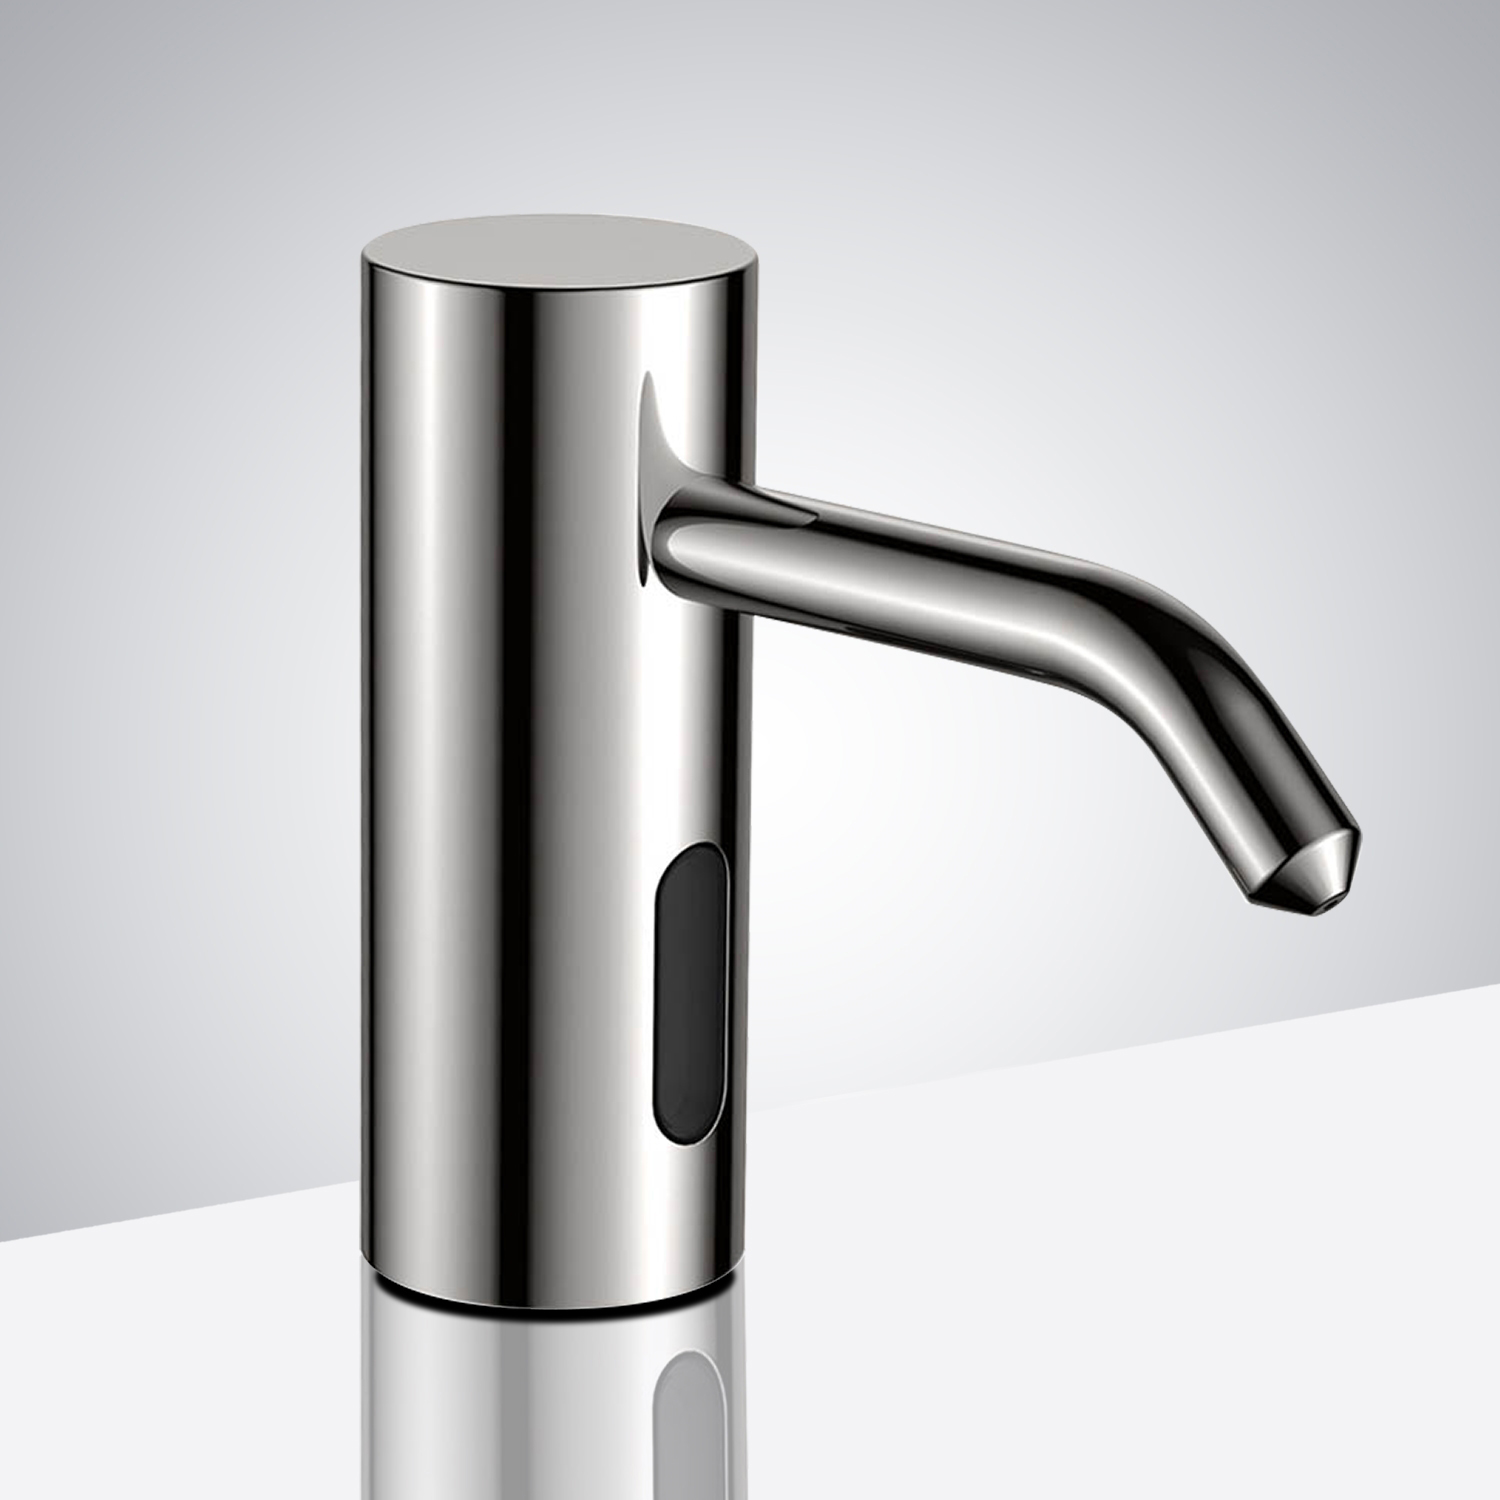 ASI Roval 20333 Stainless Steel Automatic Soap Dispenser1